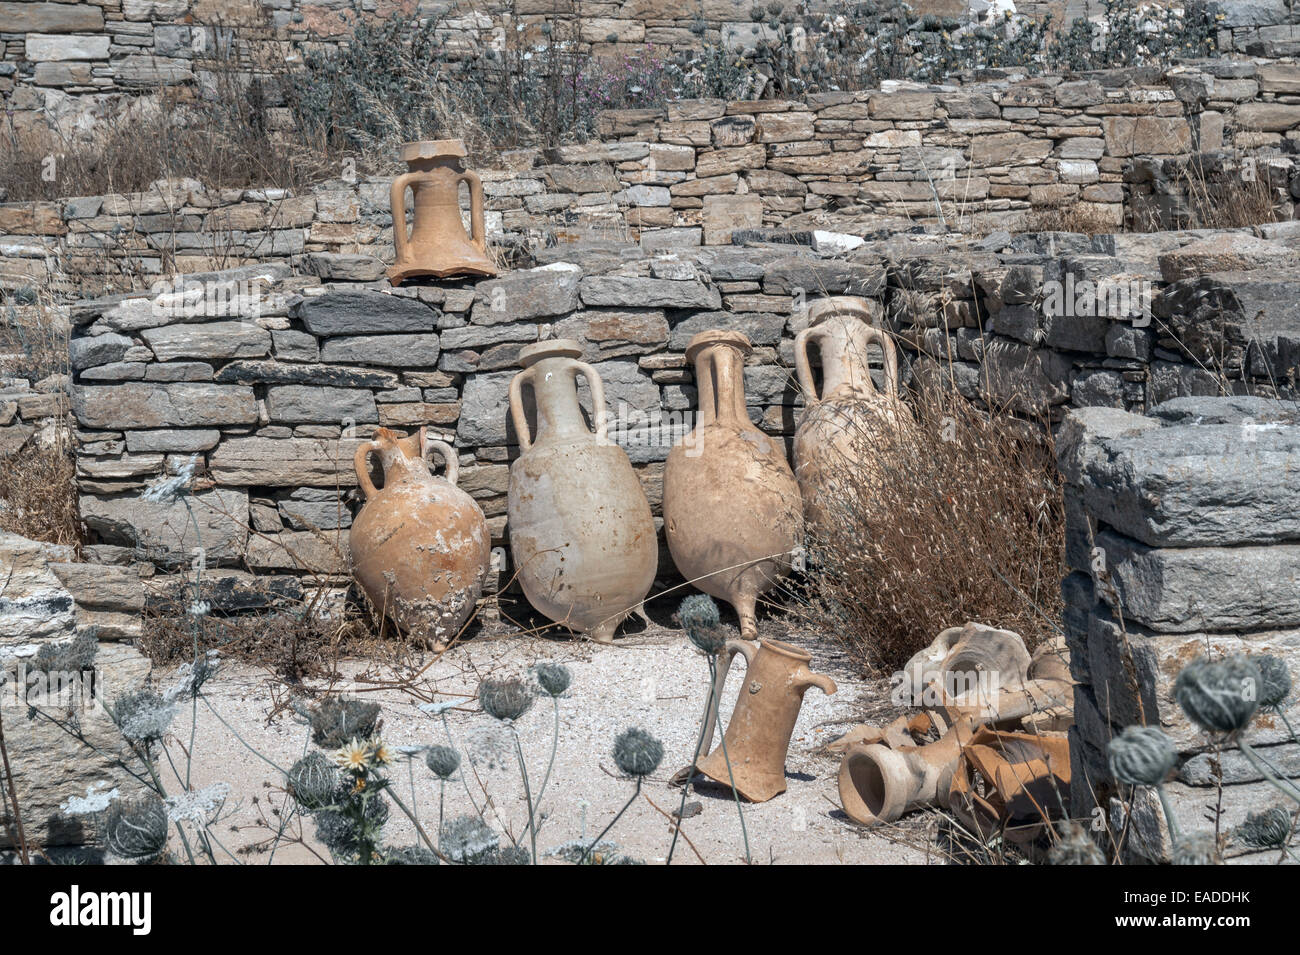 Ancient pottery wine amphora found in the ruins on the island of Delos, Greece Stock Photo